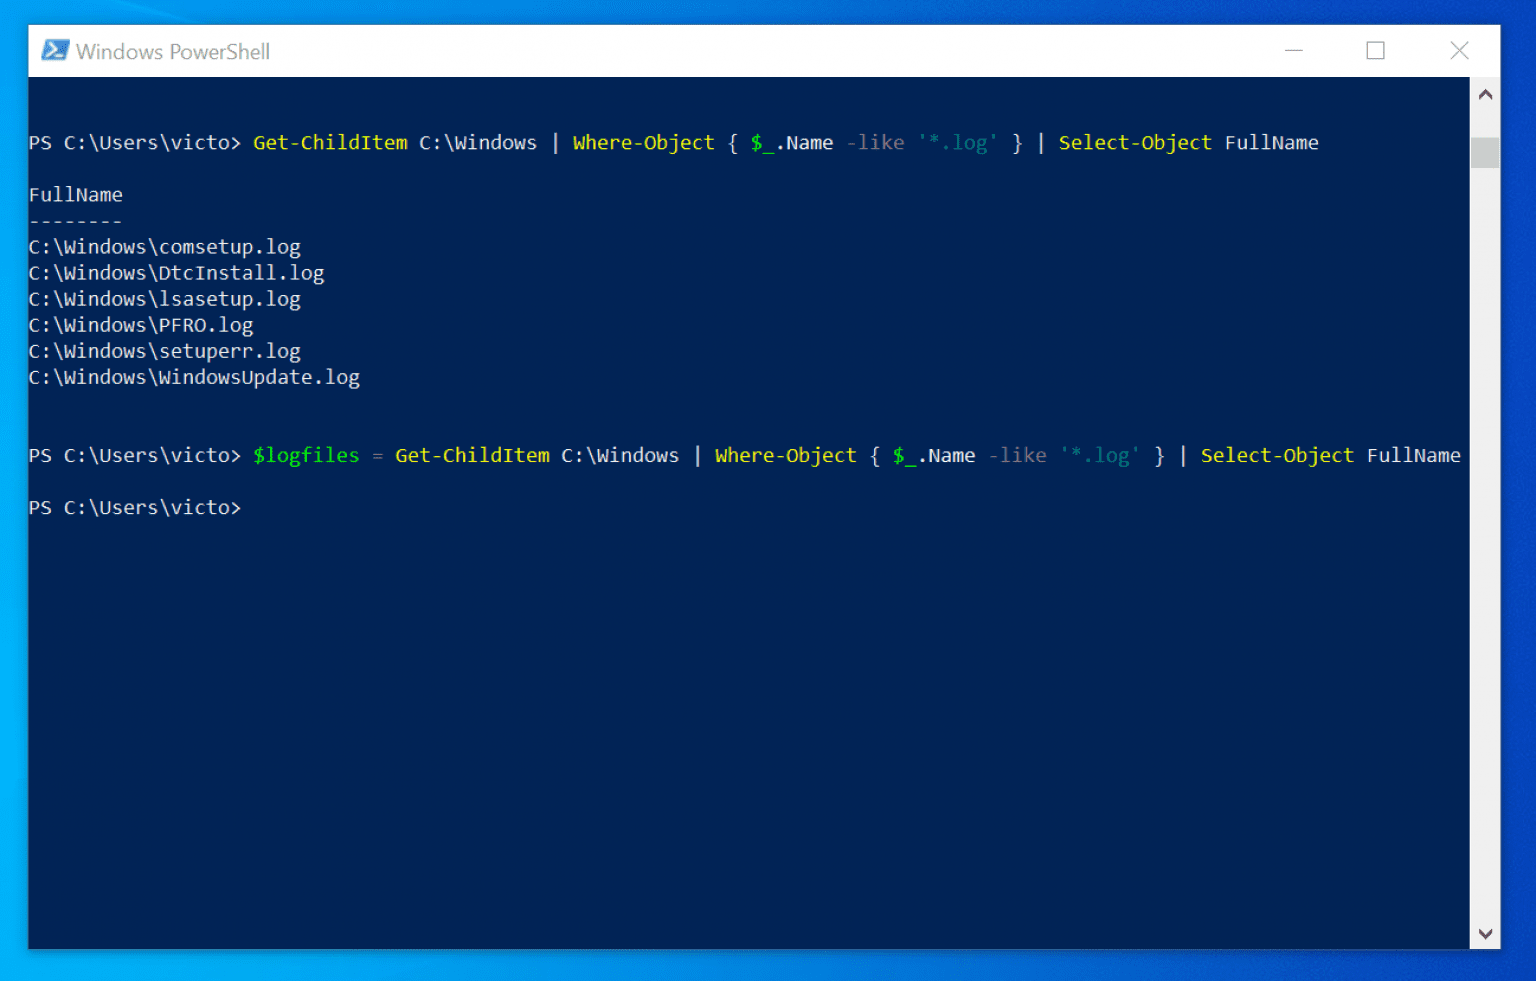 powershell find file with extension